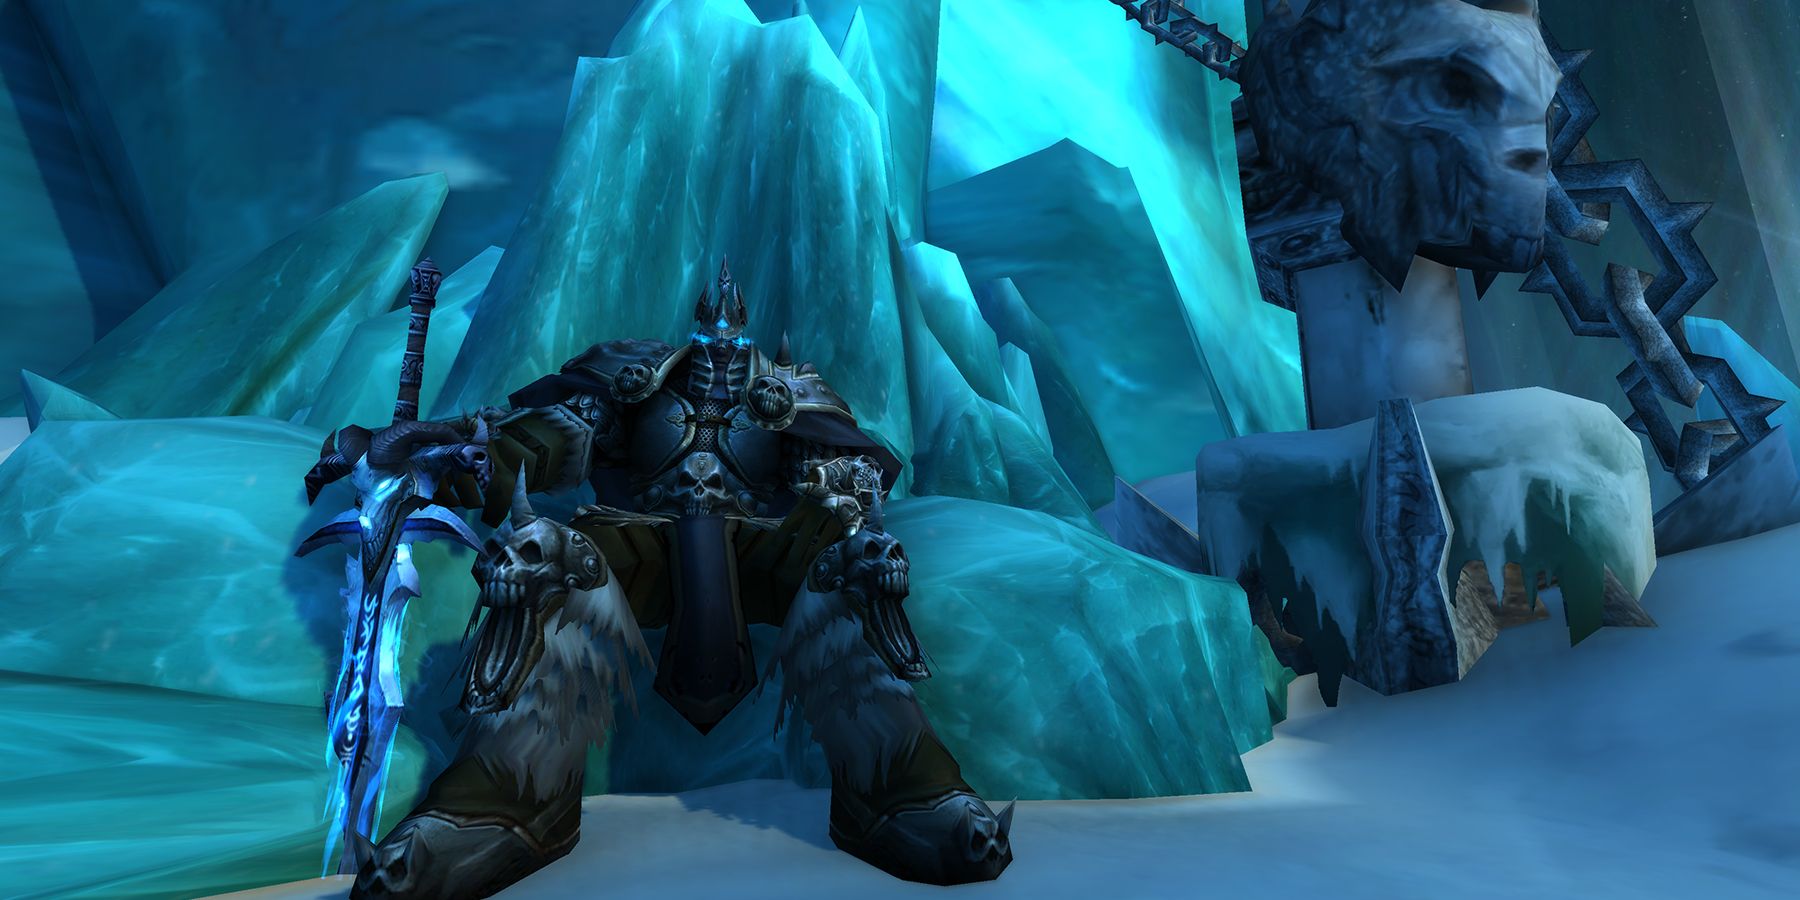 Six Ways to Make Gold in Classic Wrath of the Lich King